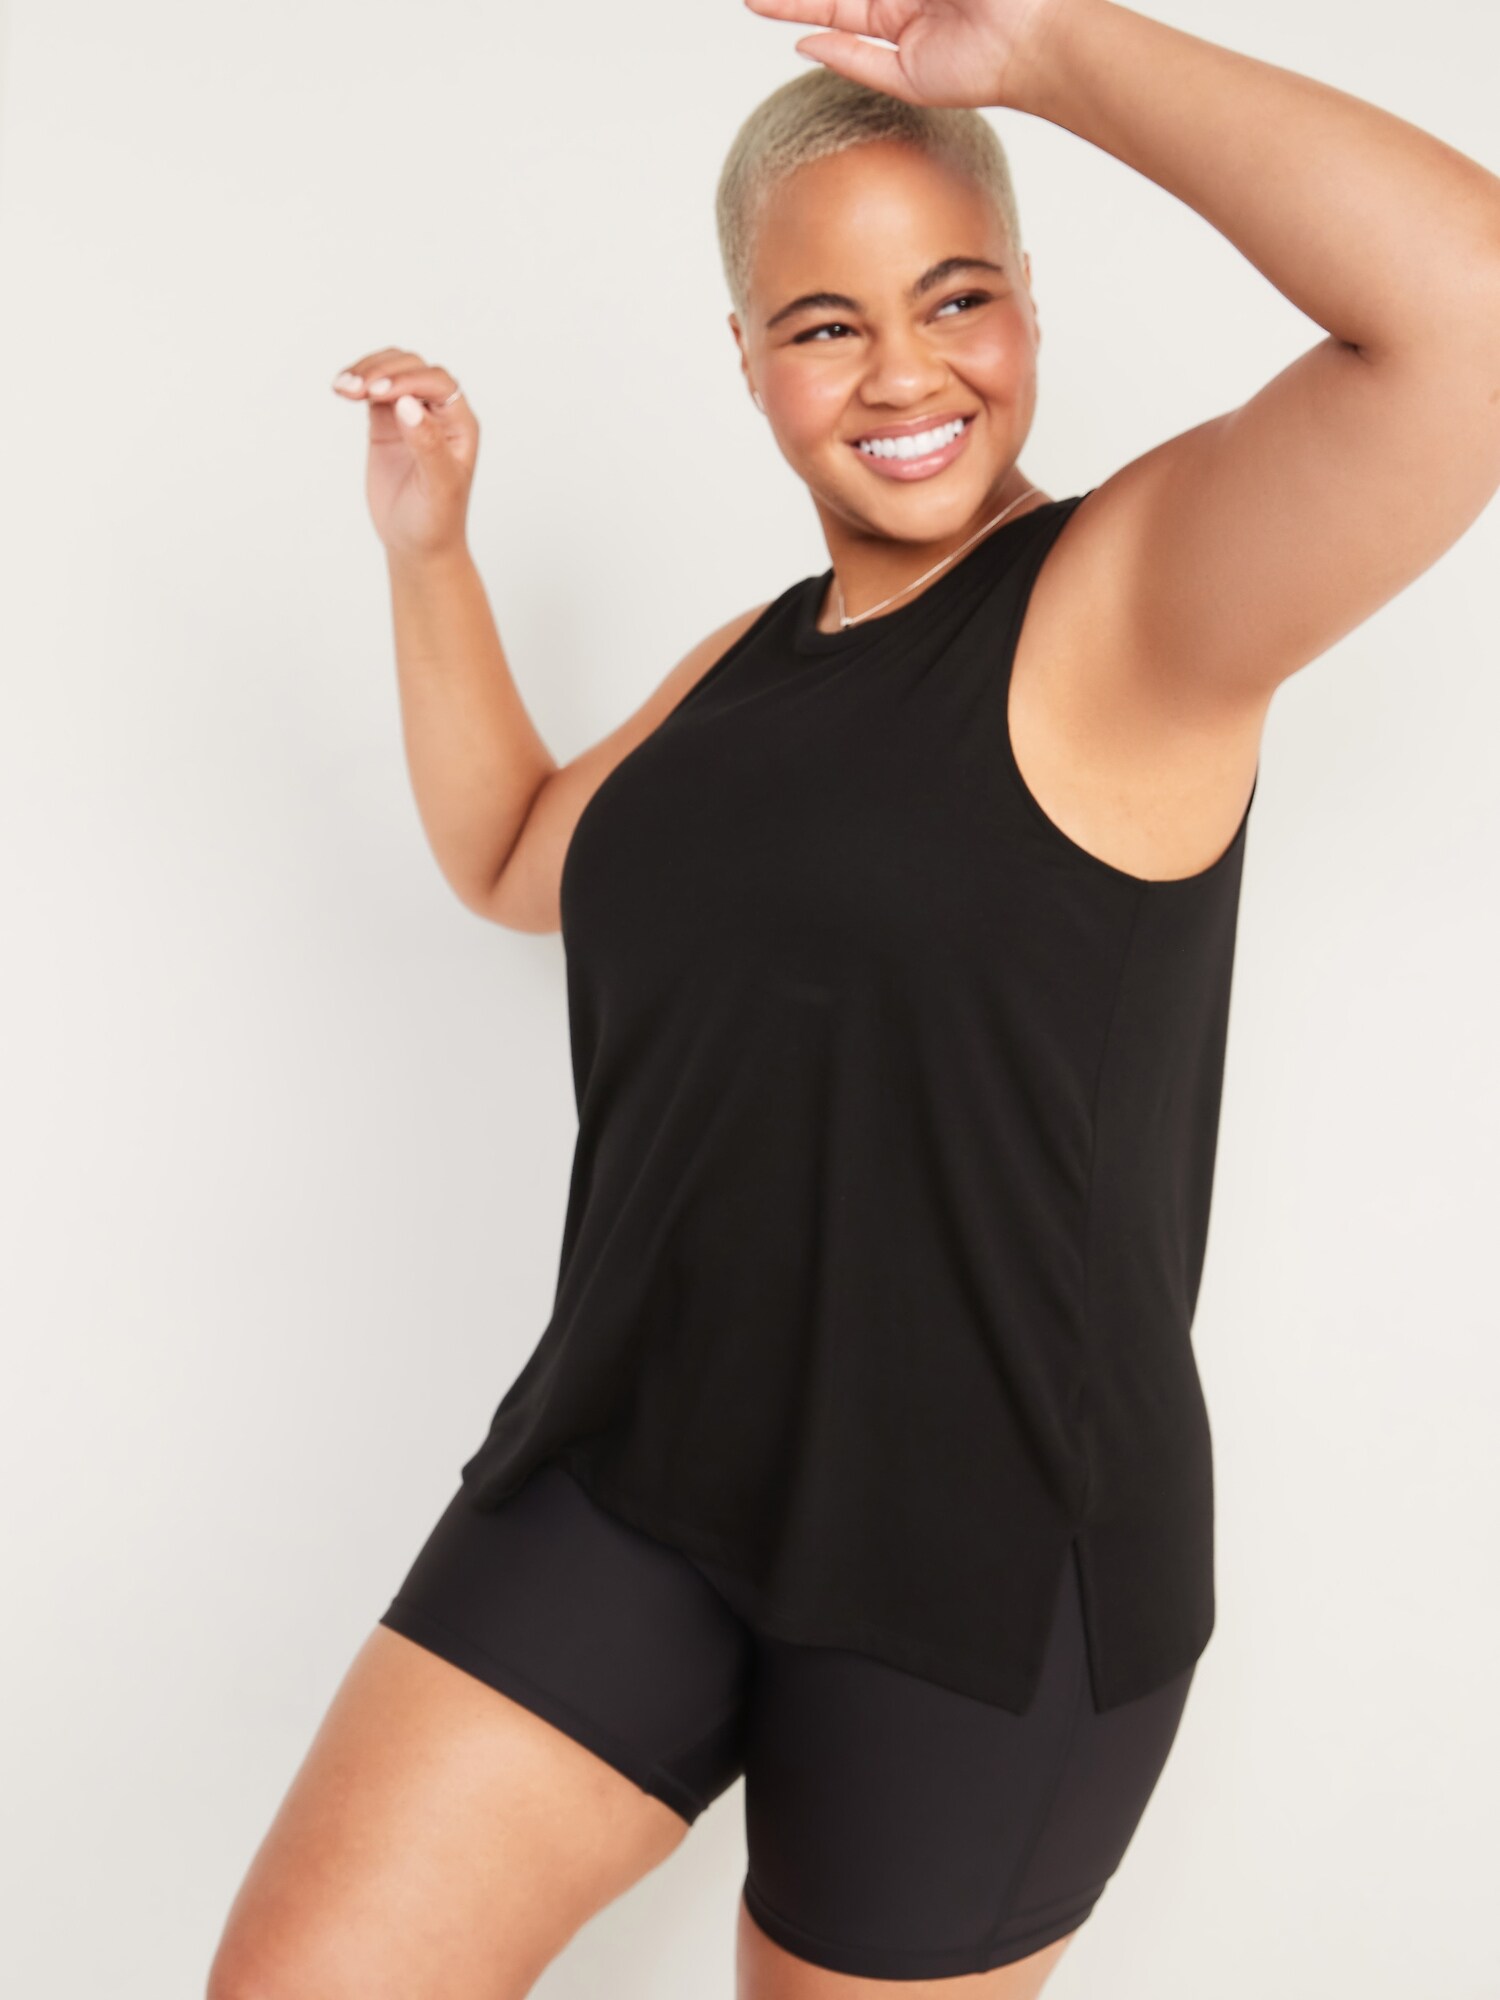 UltraLite All-Day Tank Top for Women | Old Navy